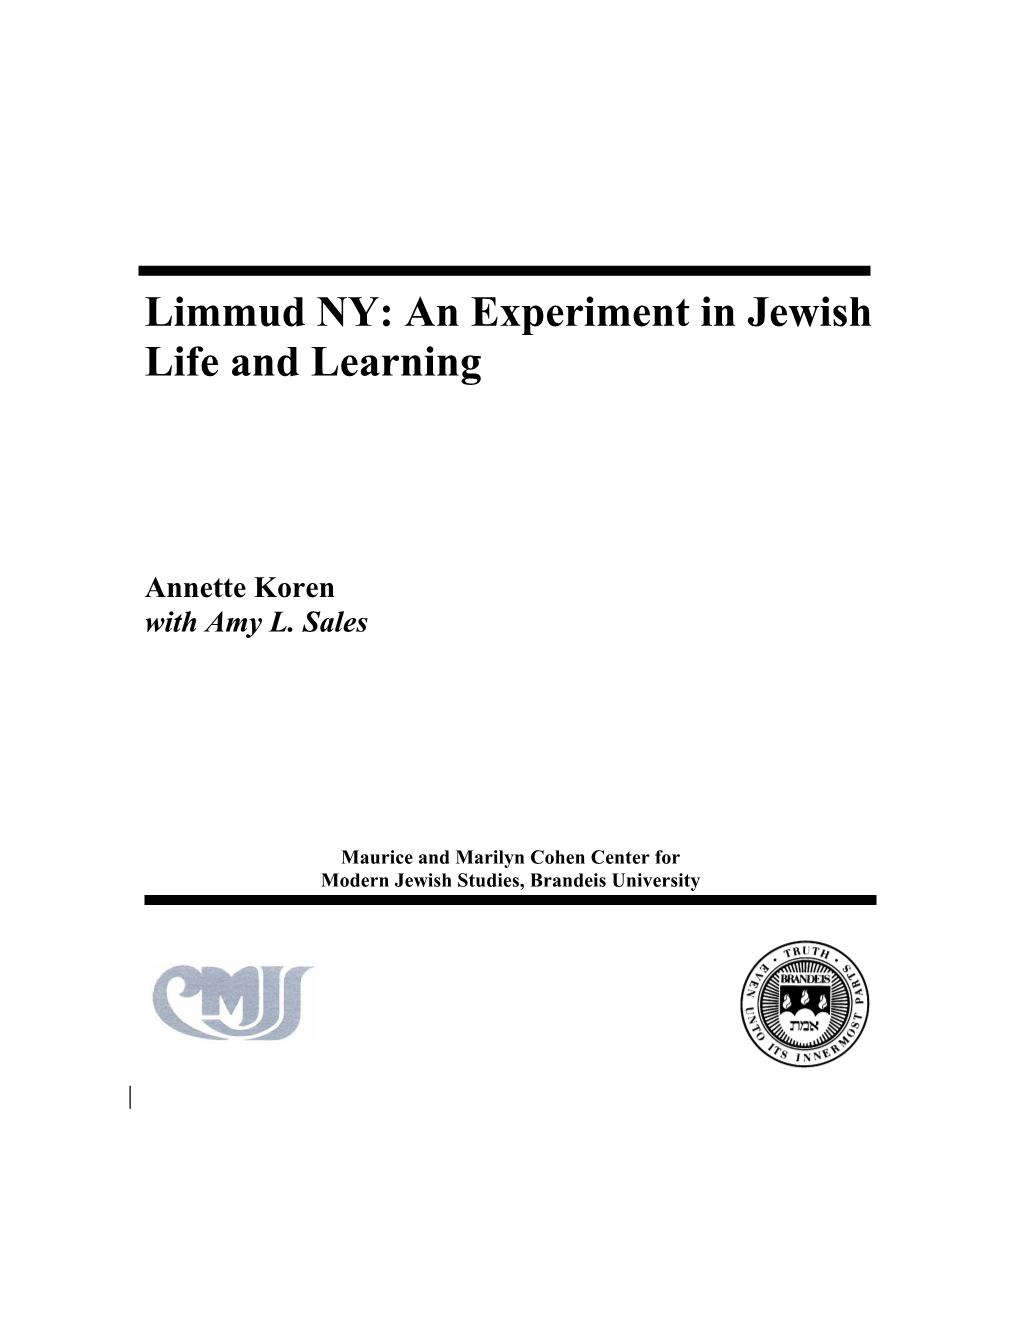 Limmud NY: an Experiment in Jewish Life and Learning